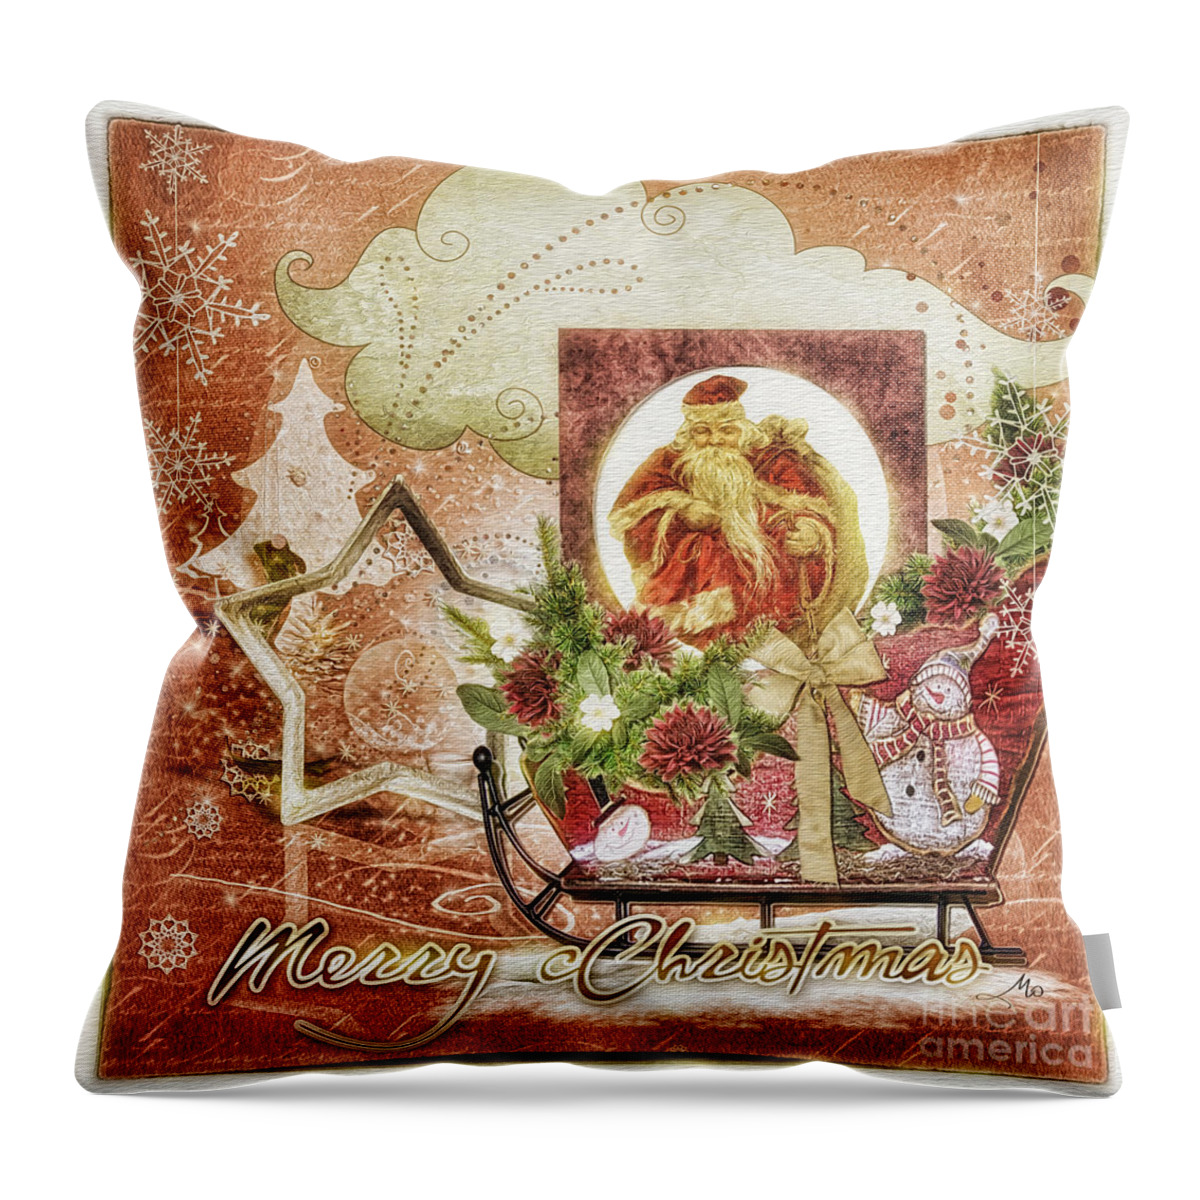 Grannys Christmas Throw Pillow featuring the painting Granny's Christmas by Mo T